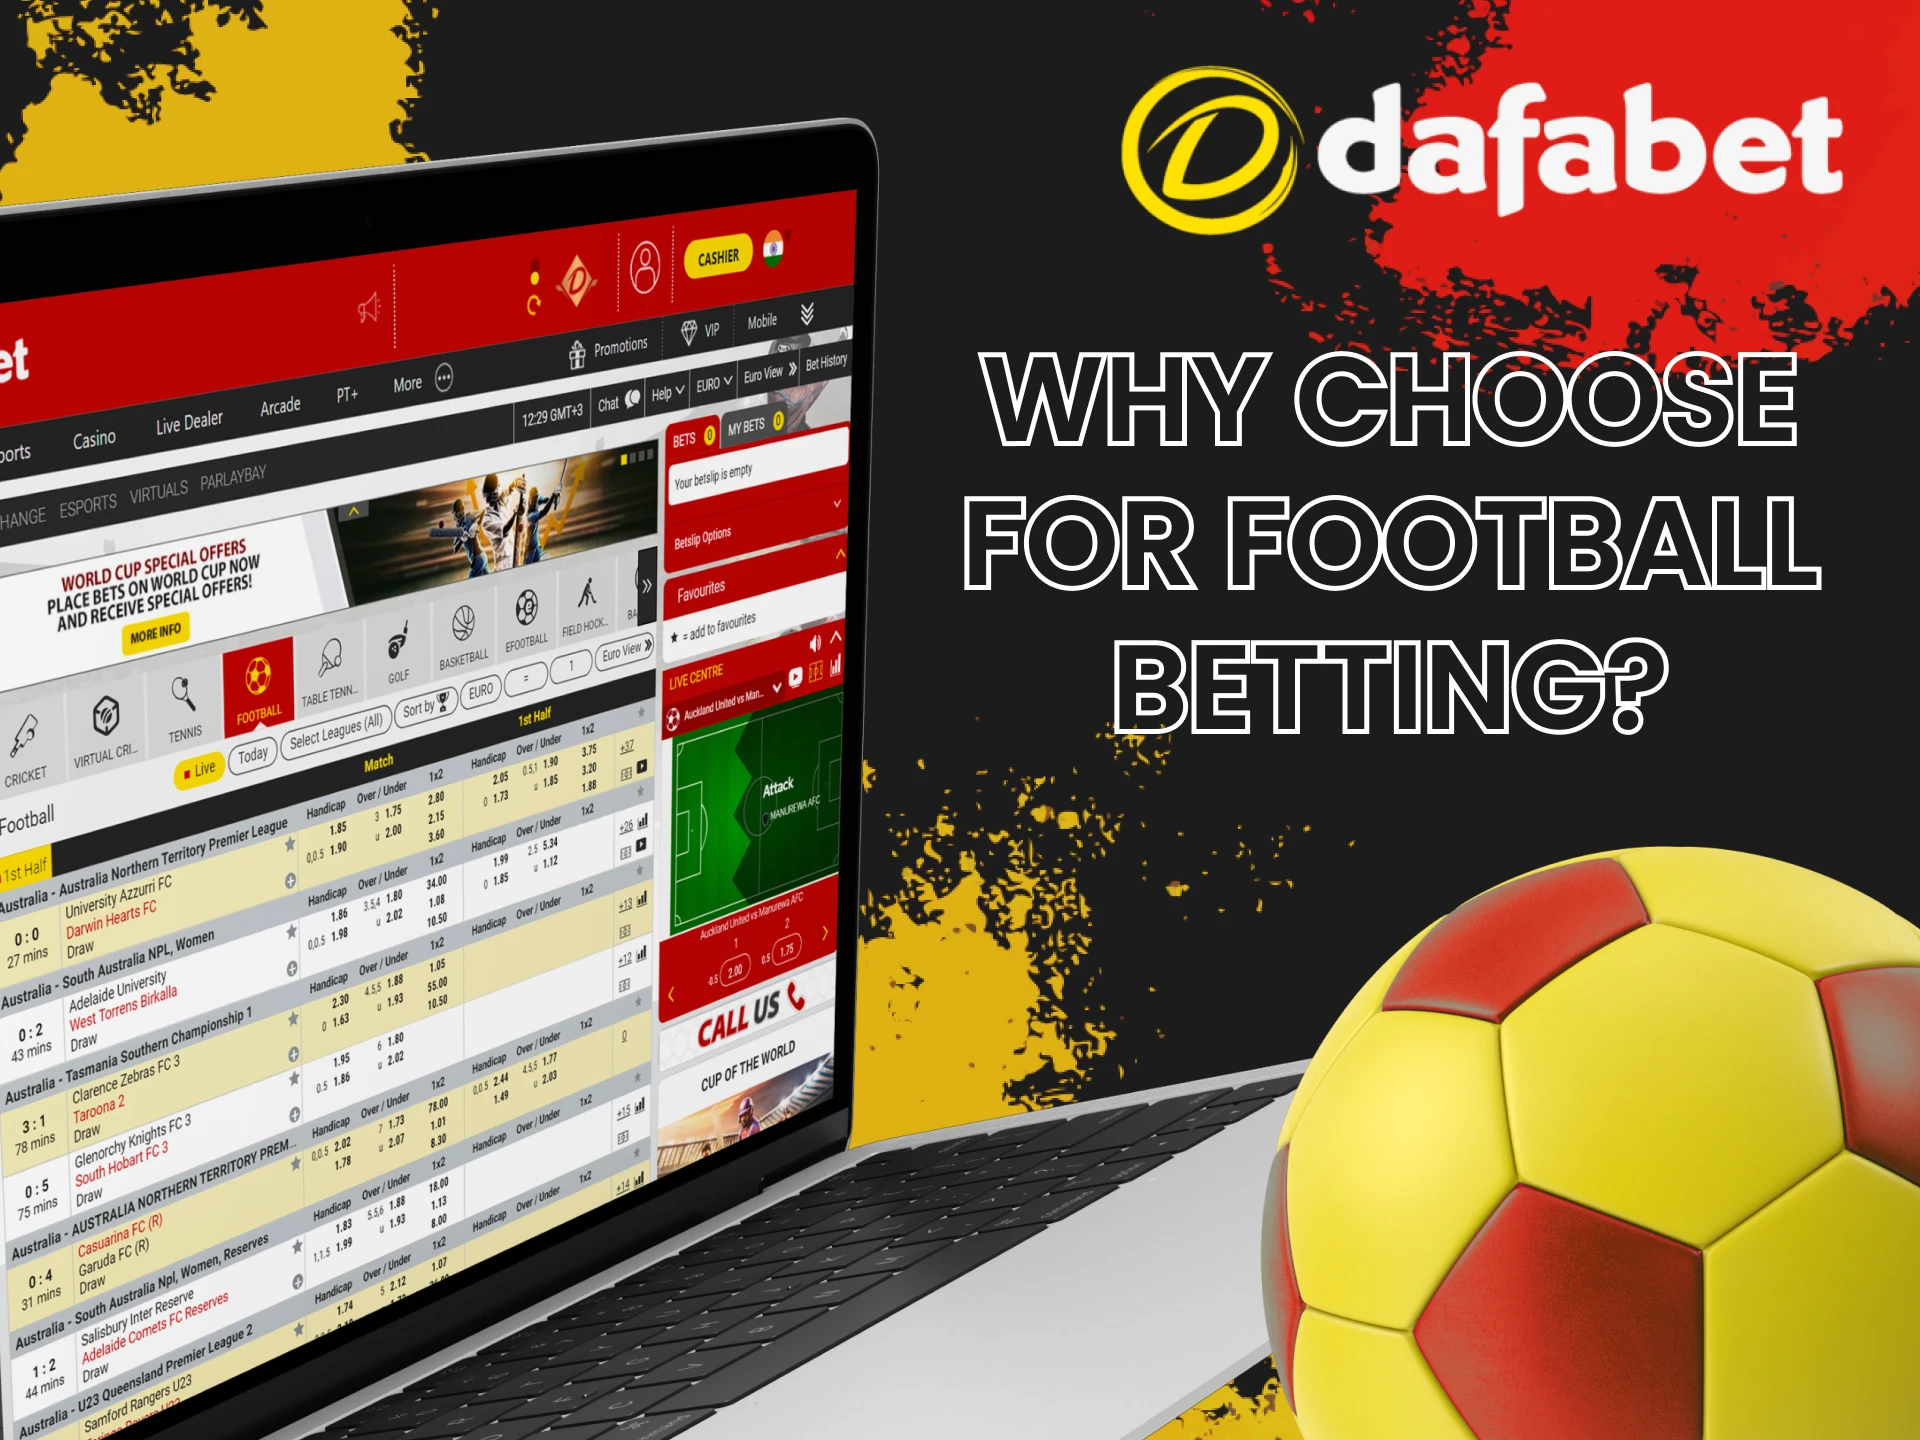 Dafabet offers comprehensive betting options on a wide range of football events.